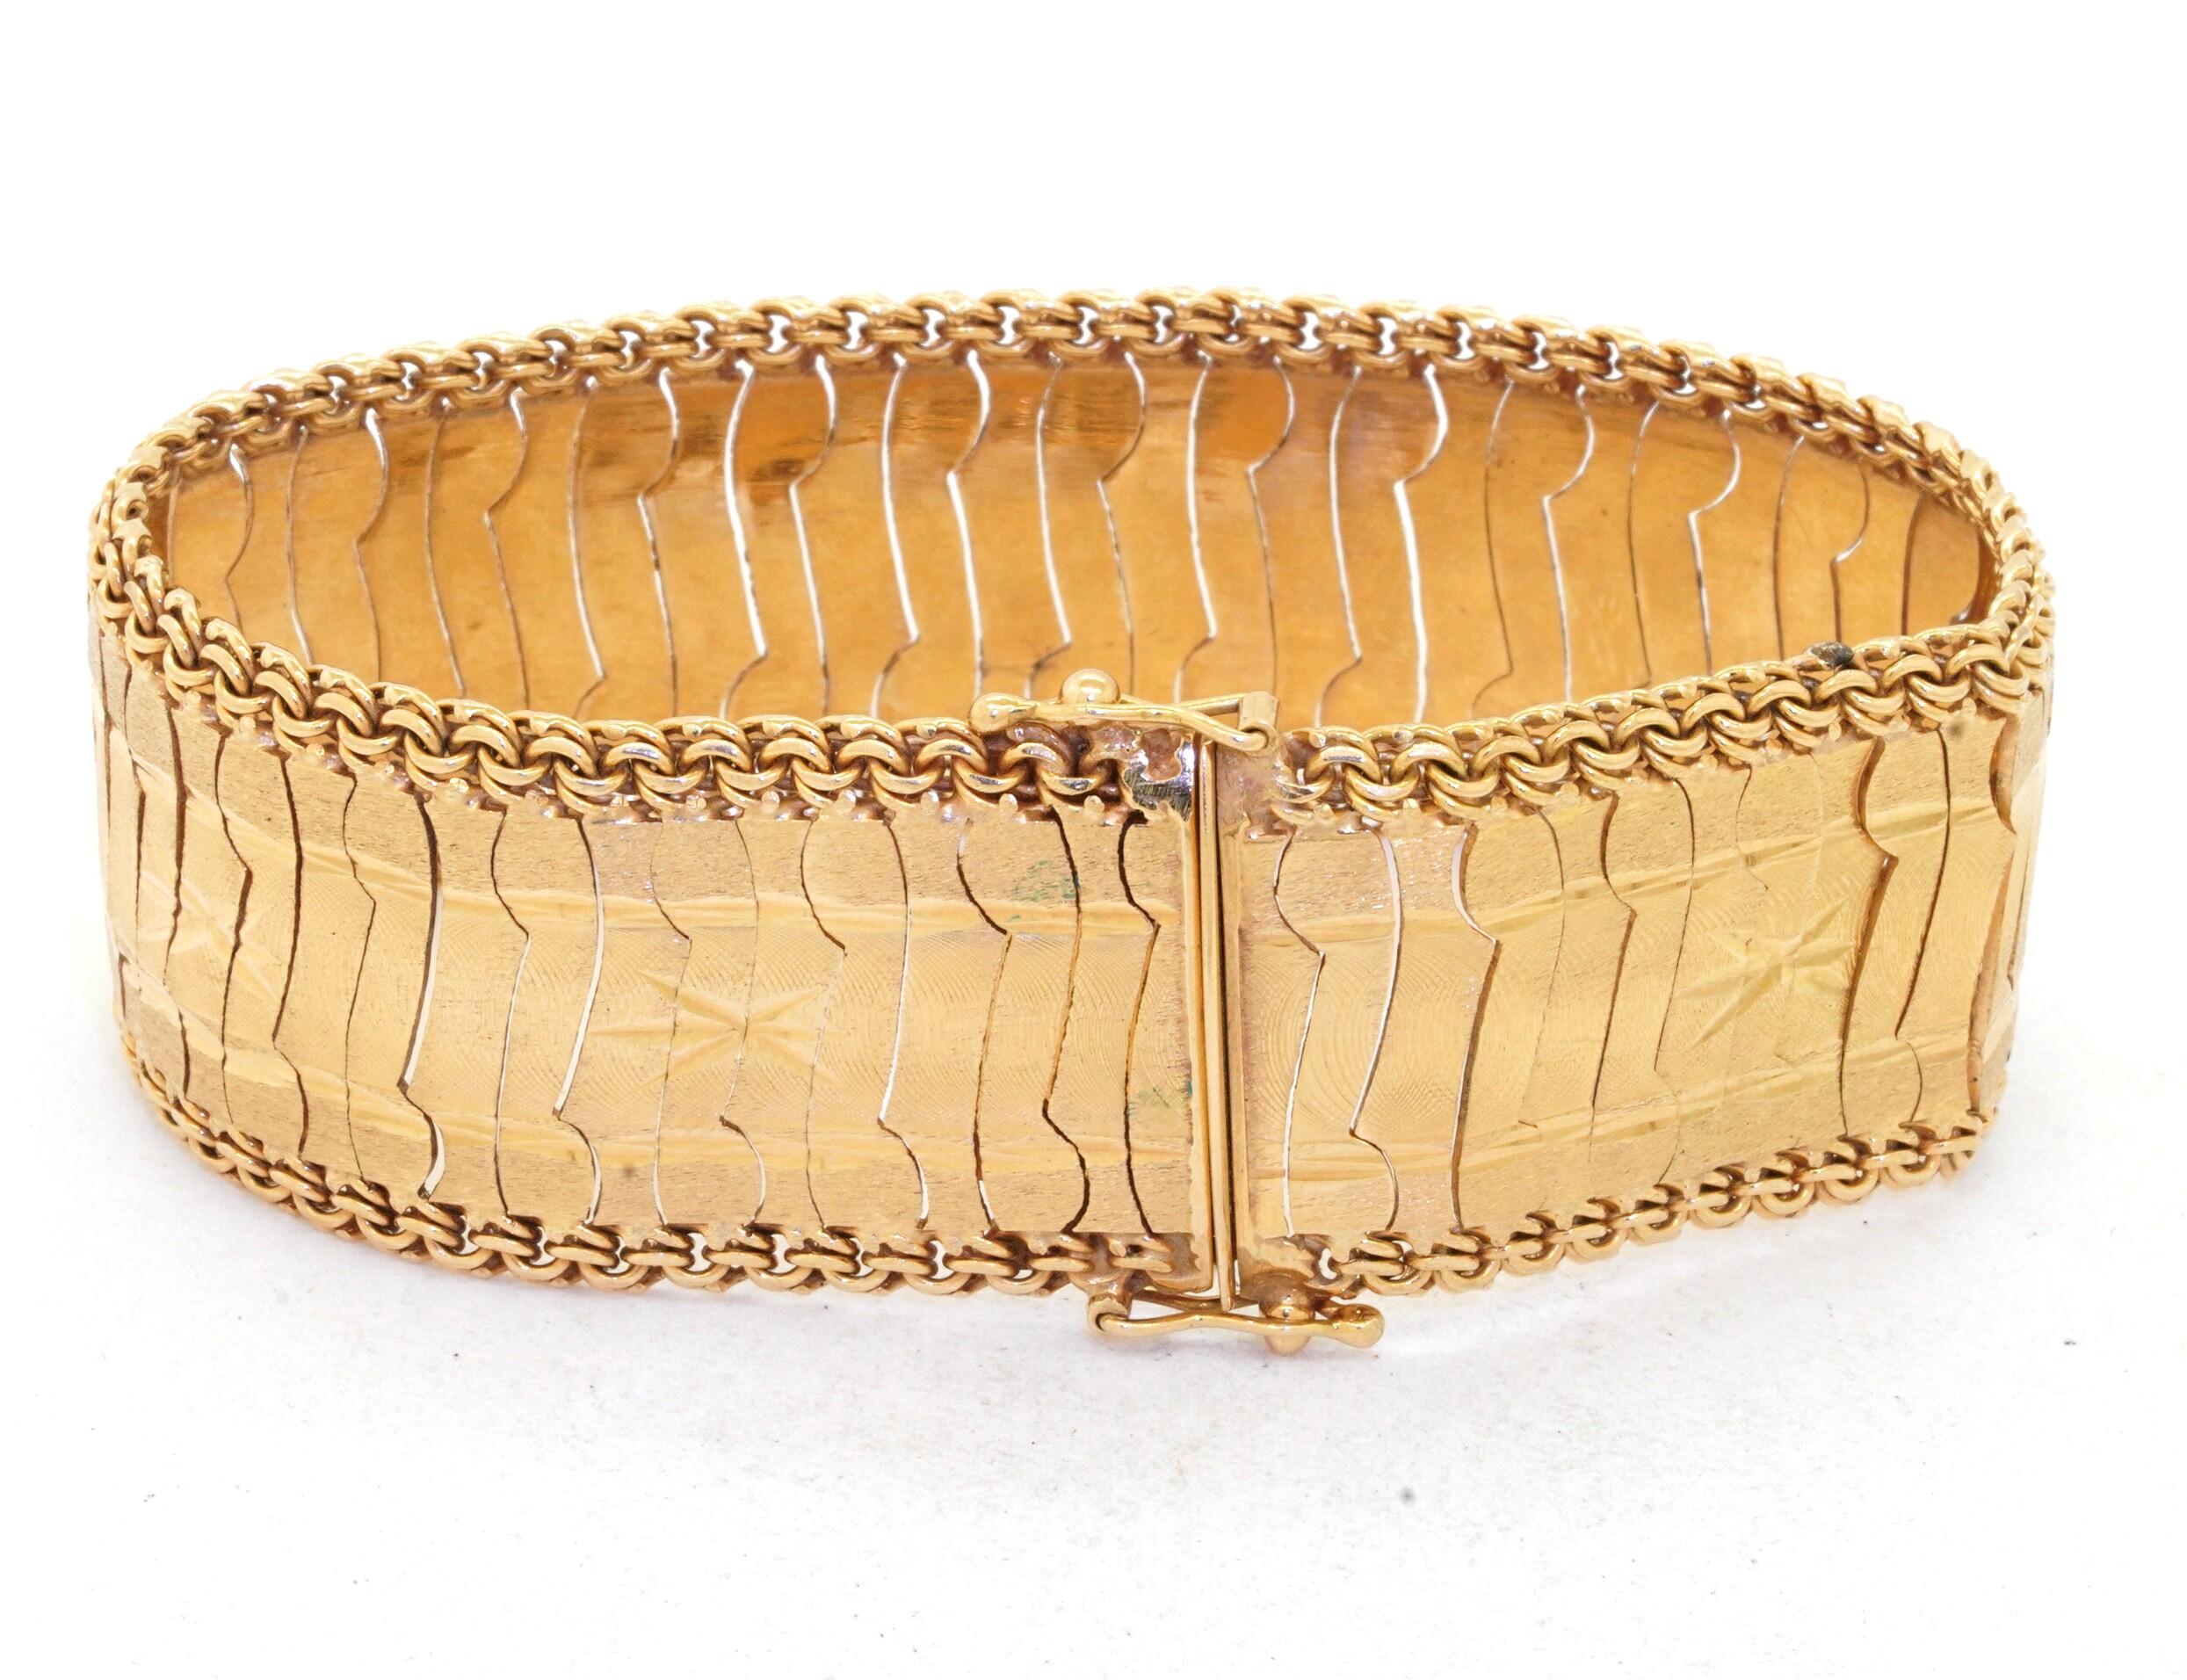 Vintage 18K Yellow Gold Floral Bracelet w/ Cable Sides In Excellent Condition For Sale In Fort Lauderdale, FL